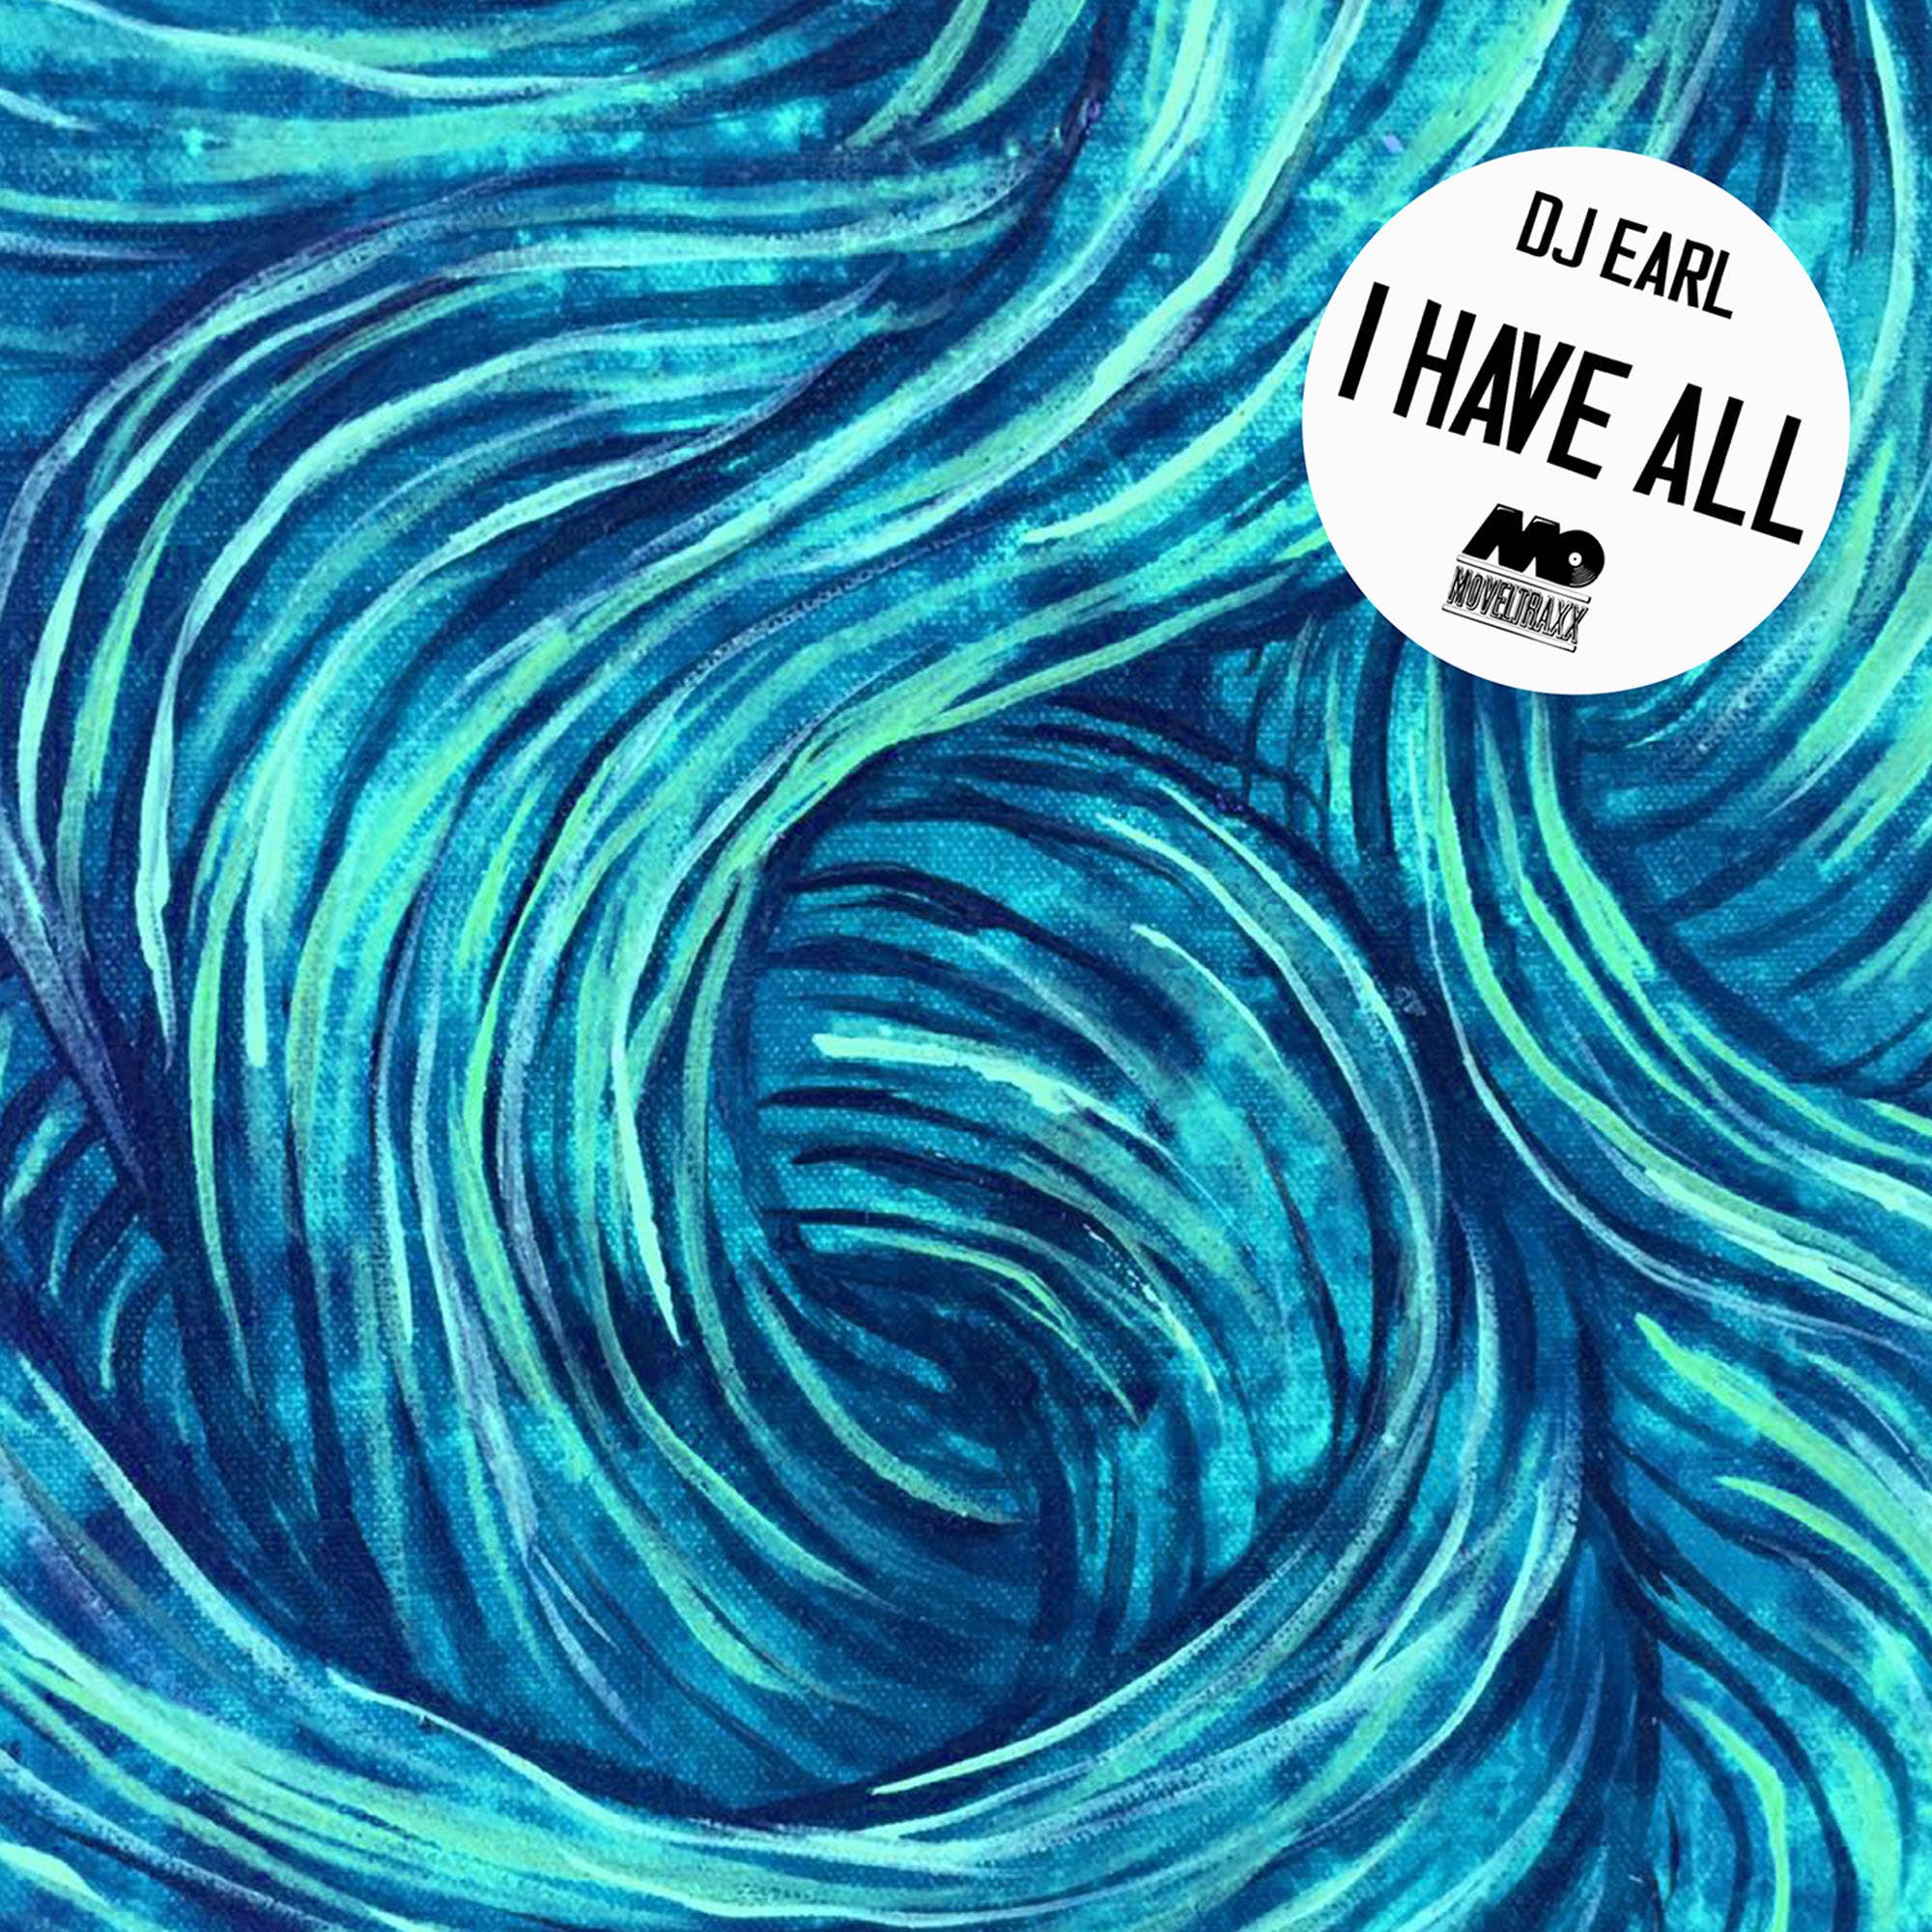 DJ Earl "I Have All" cover art